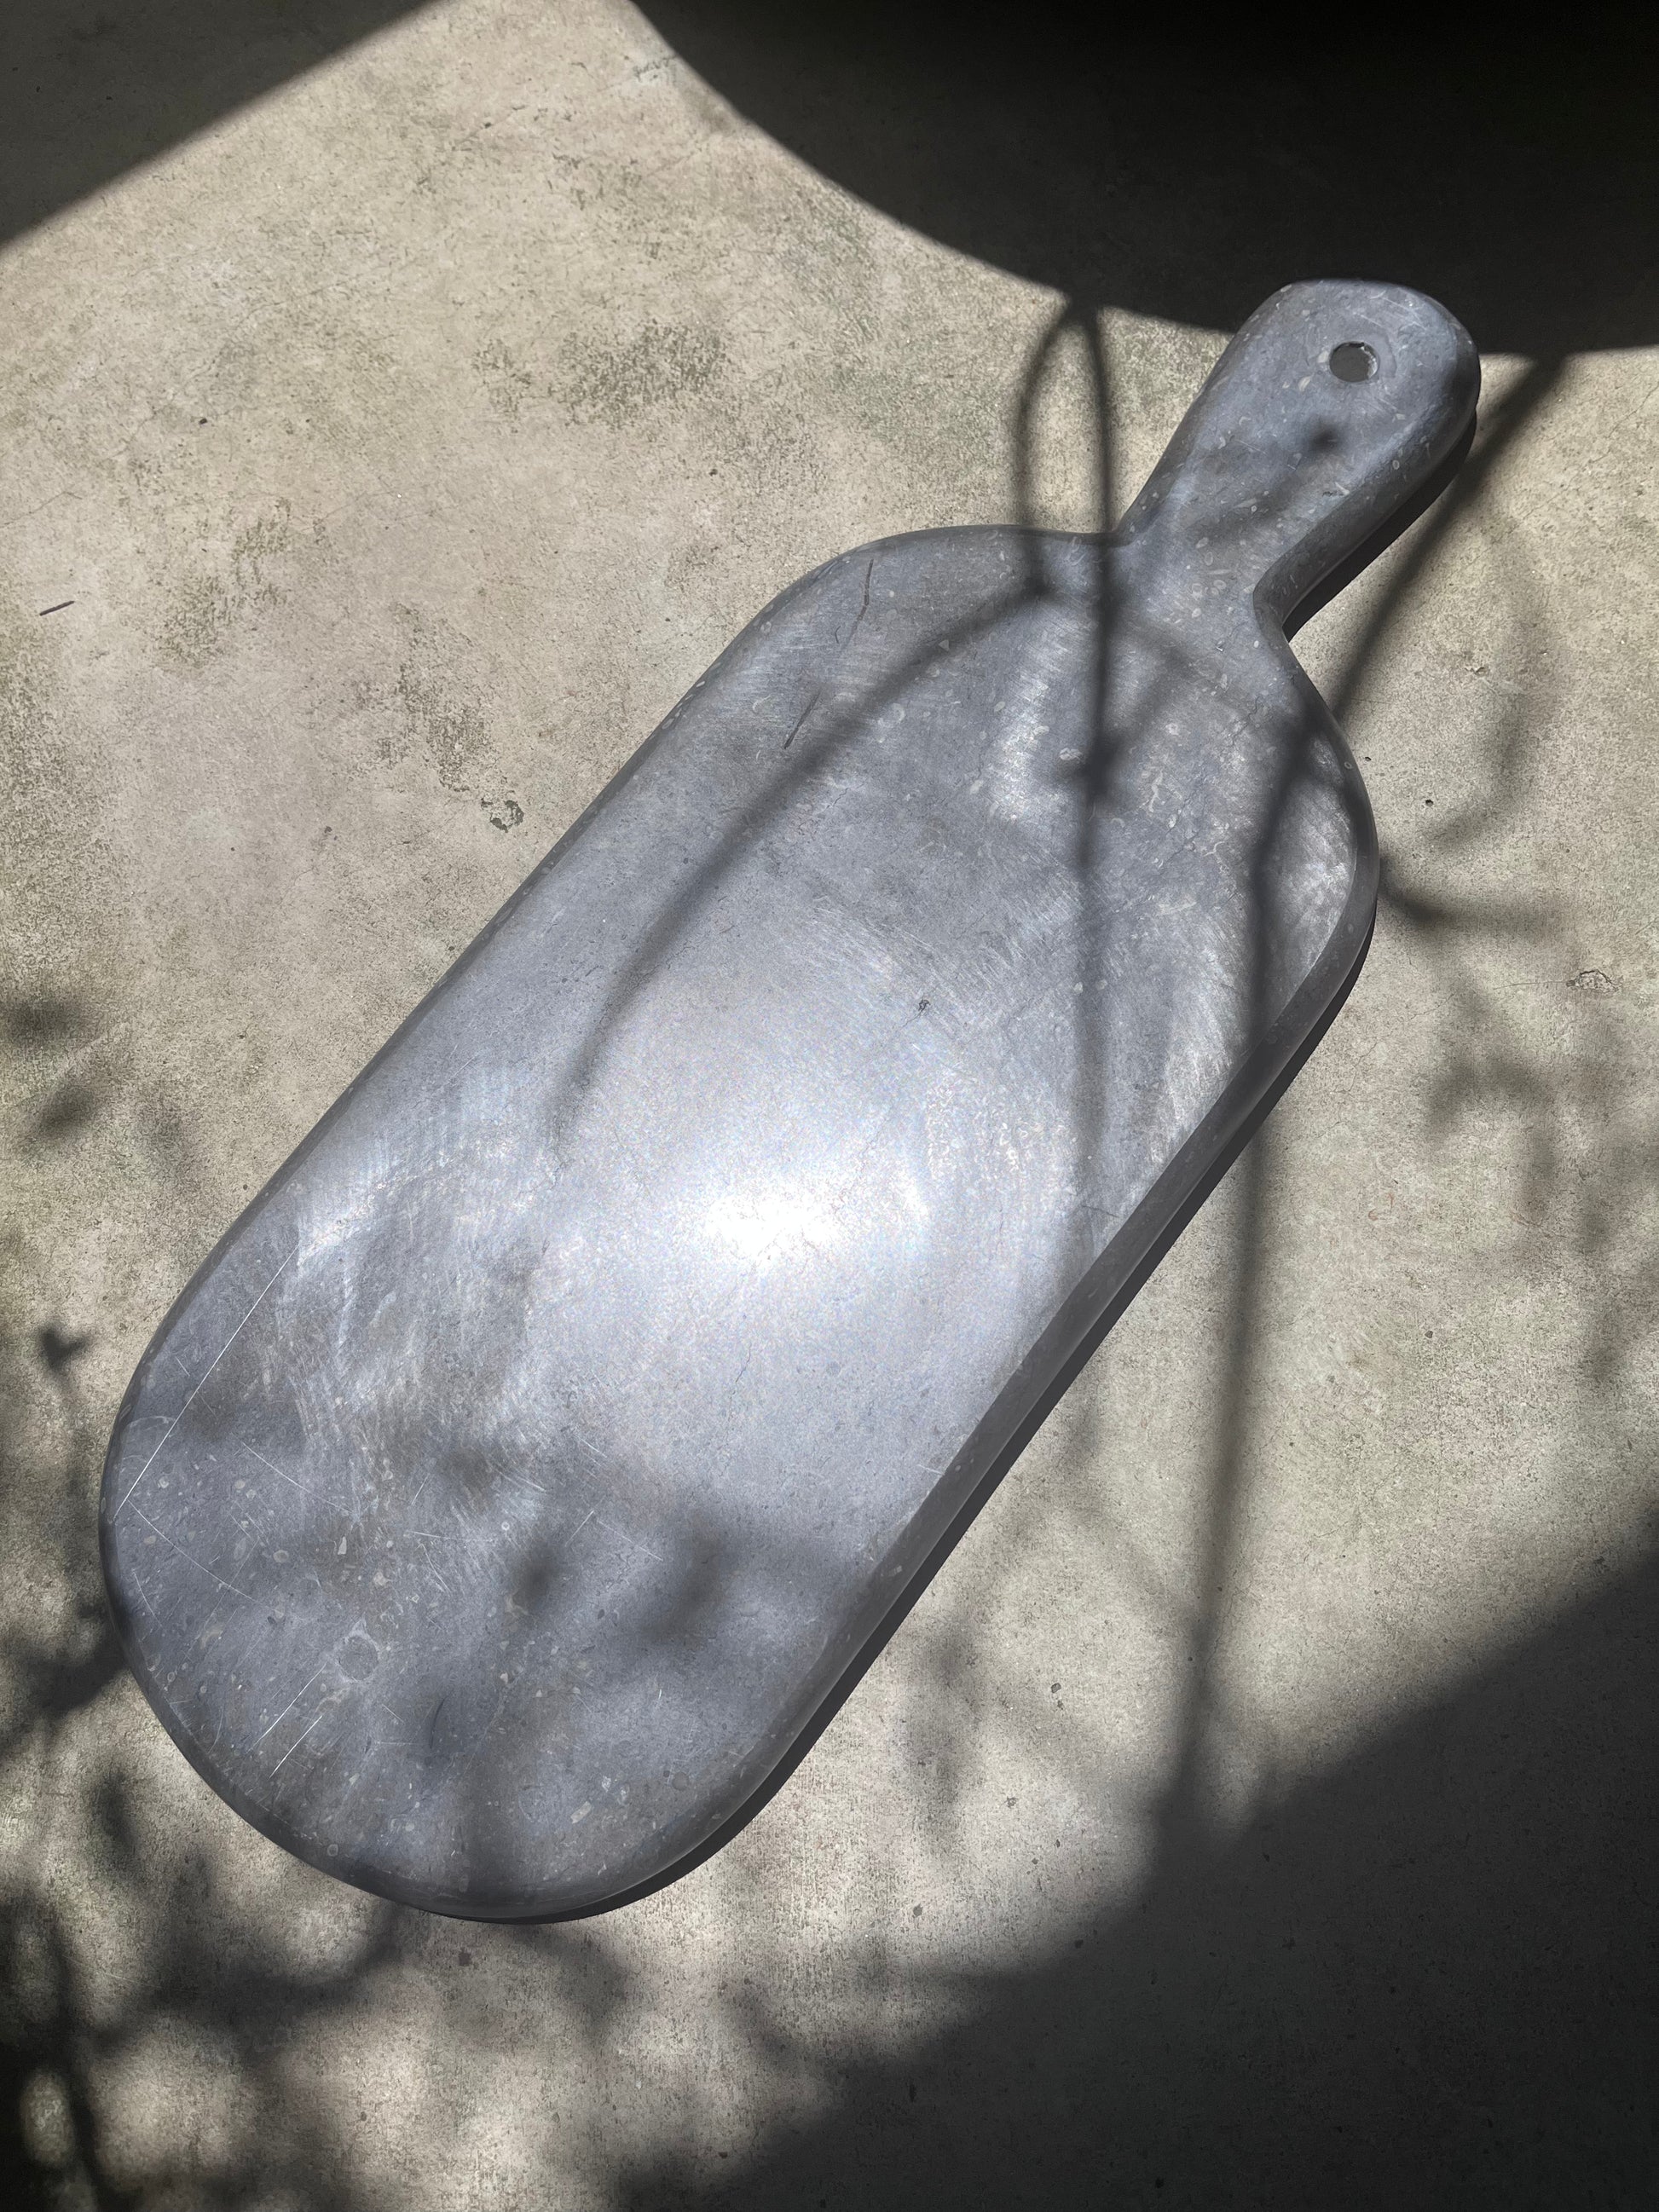 Image of Terra Cruda's Marble Serving Paddle from the Australian homewares collection